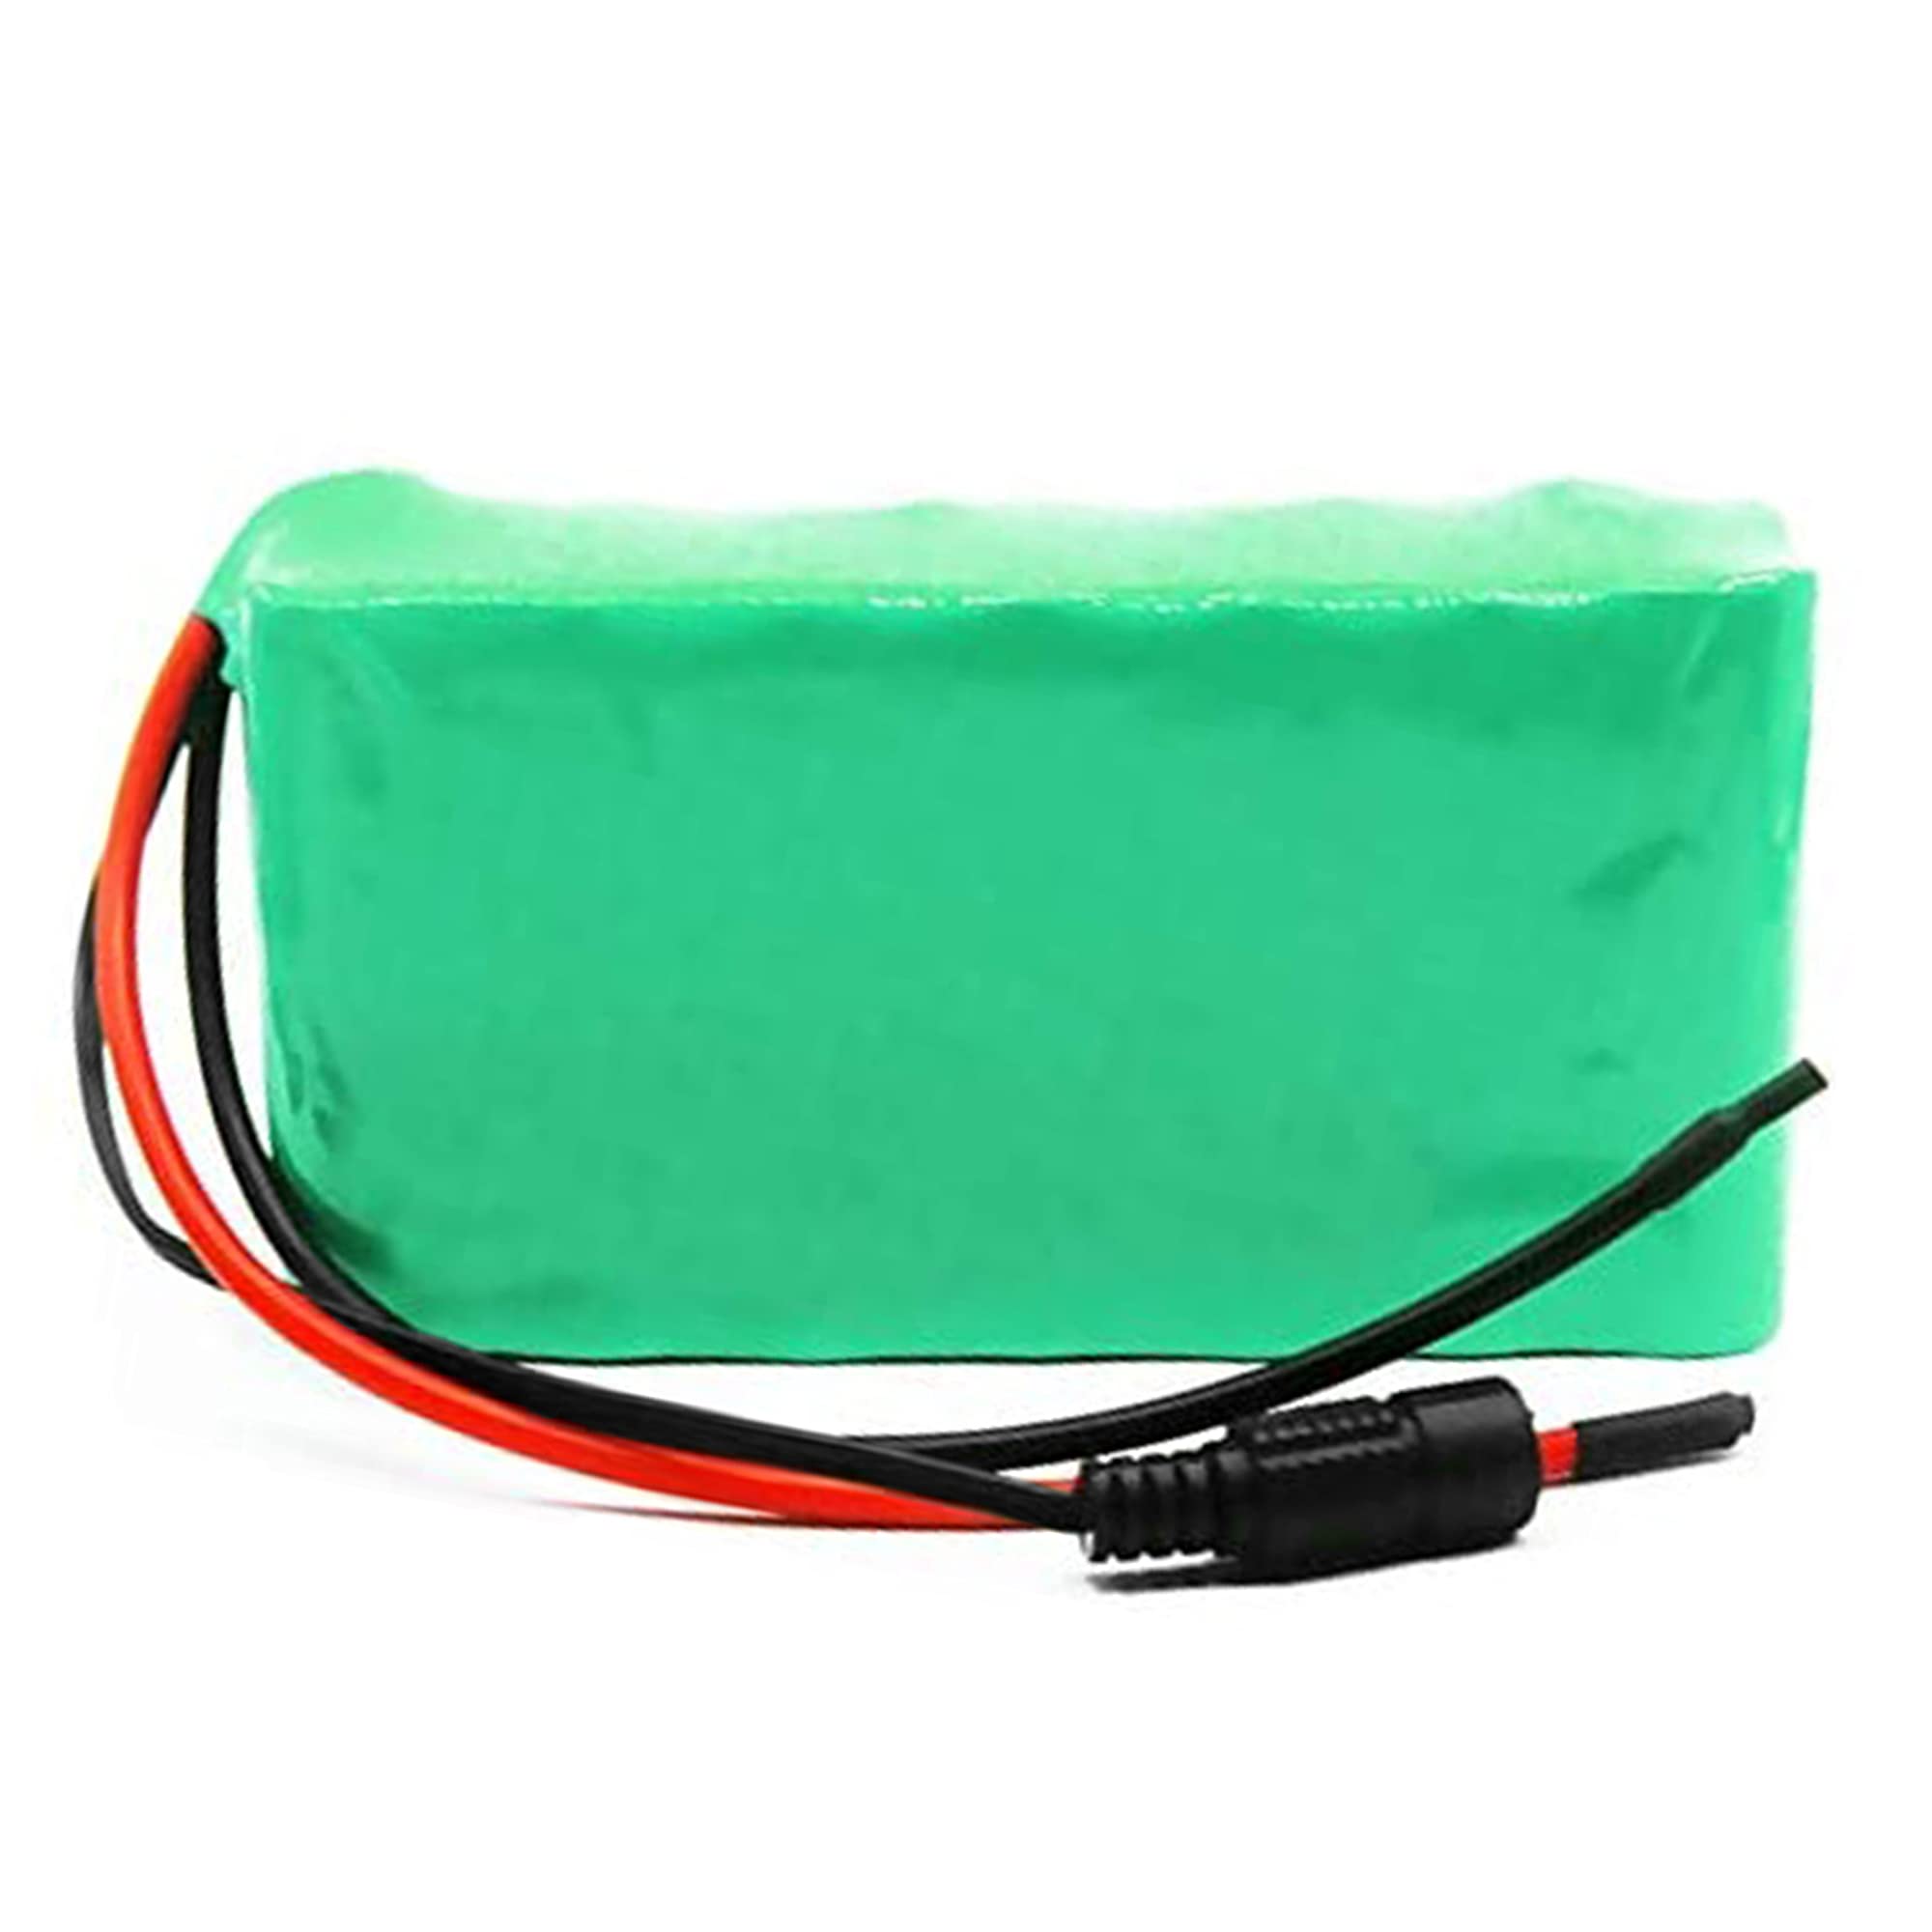 TGHY E-Bike Lithium Battery 24V 6000mAh Lithium-ion Battery Pack Suitable for 500W Motor for Mobility Scooter Electric Go-Kart with BMS and 25.2V Charger,XT60